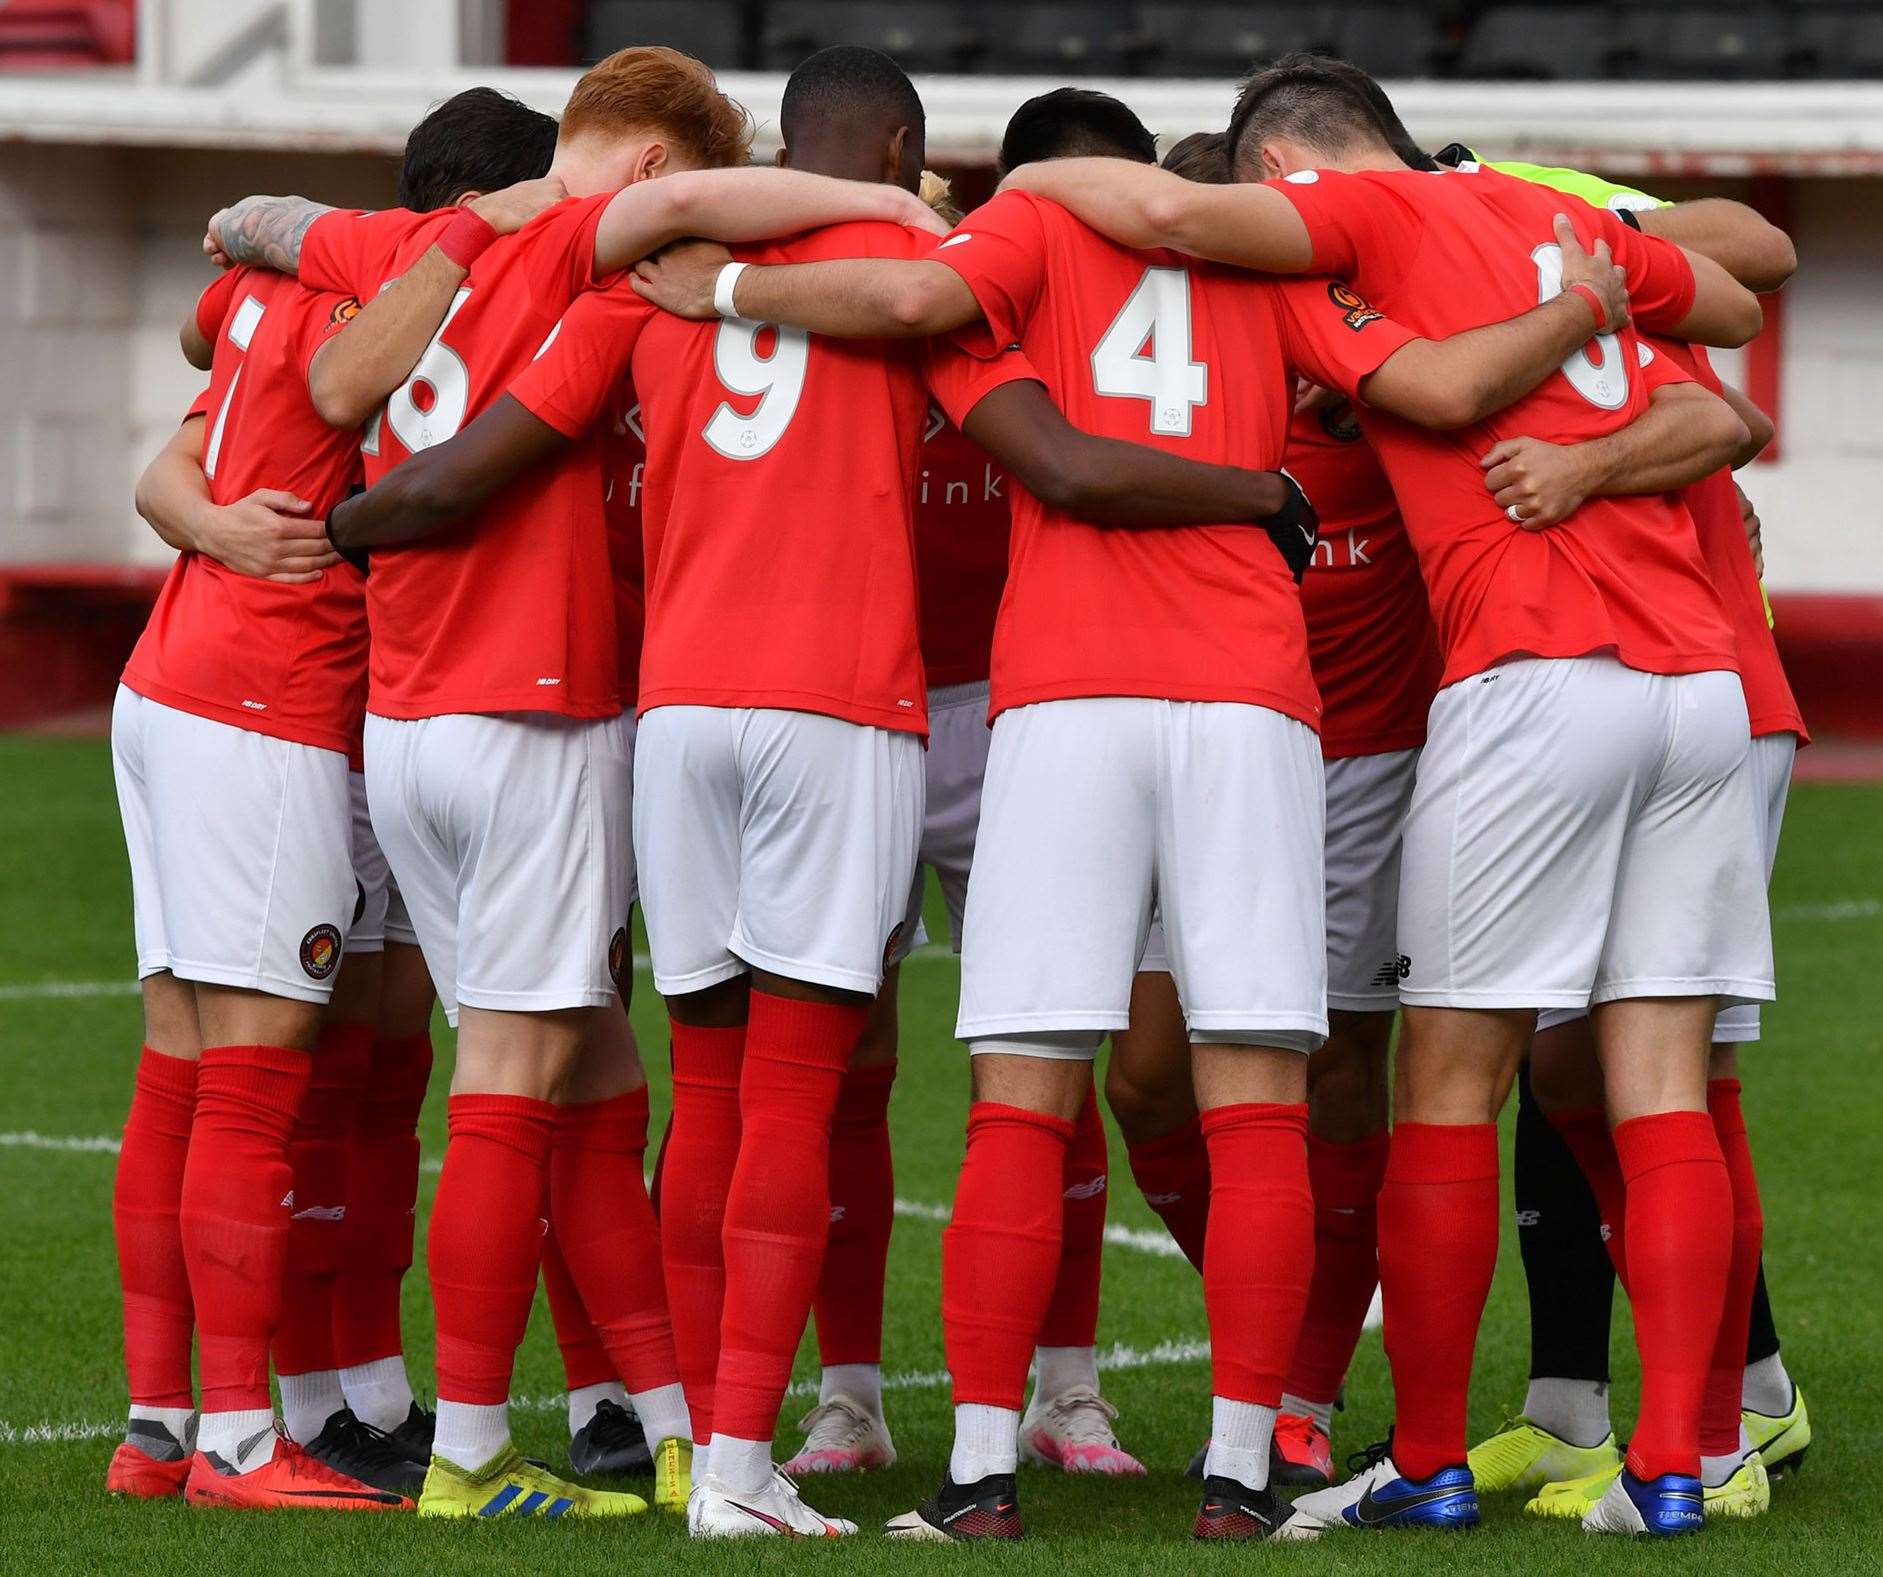 Ebbsfleet will host Tonbridge on the opening day of the National League South season. Picture: Keith Gillard